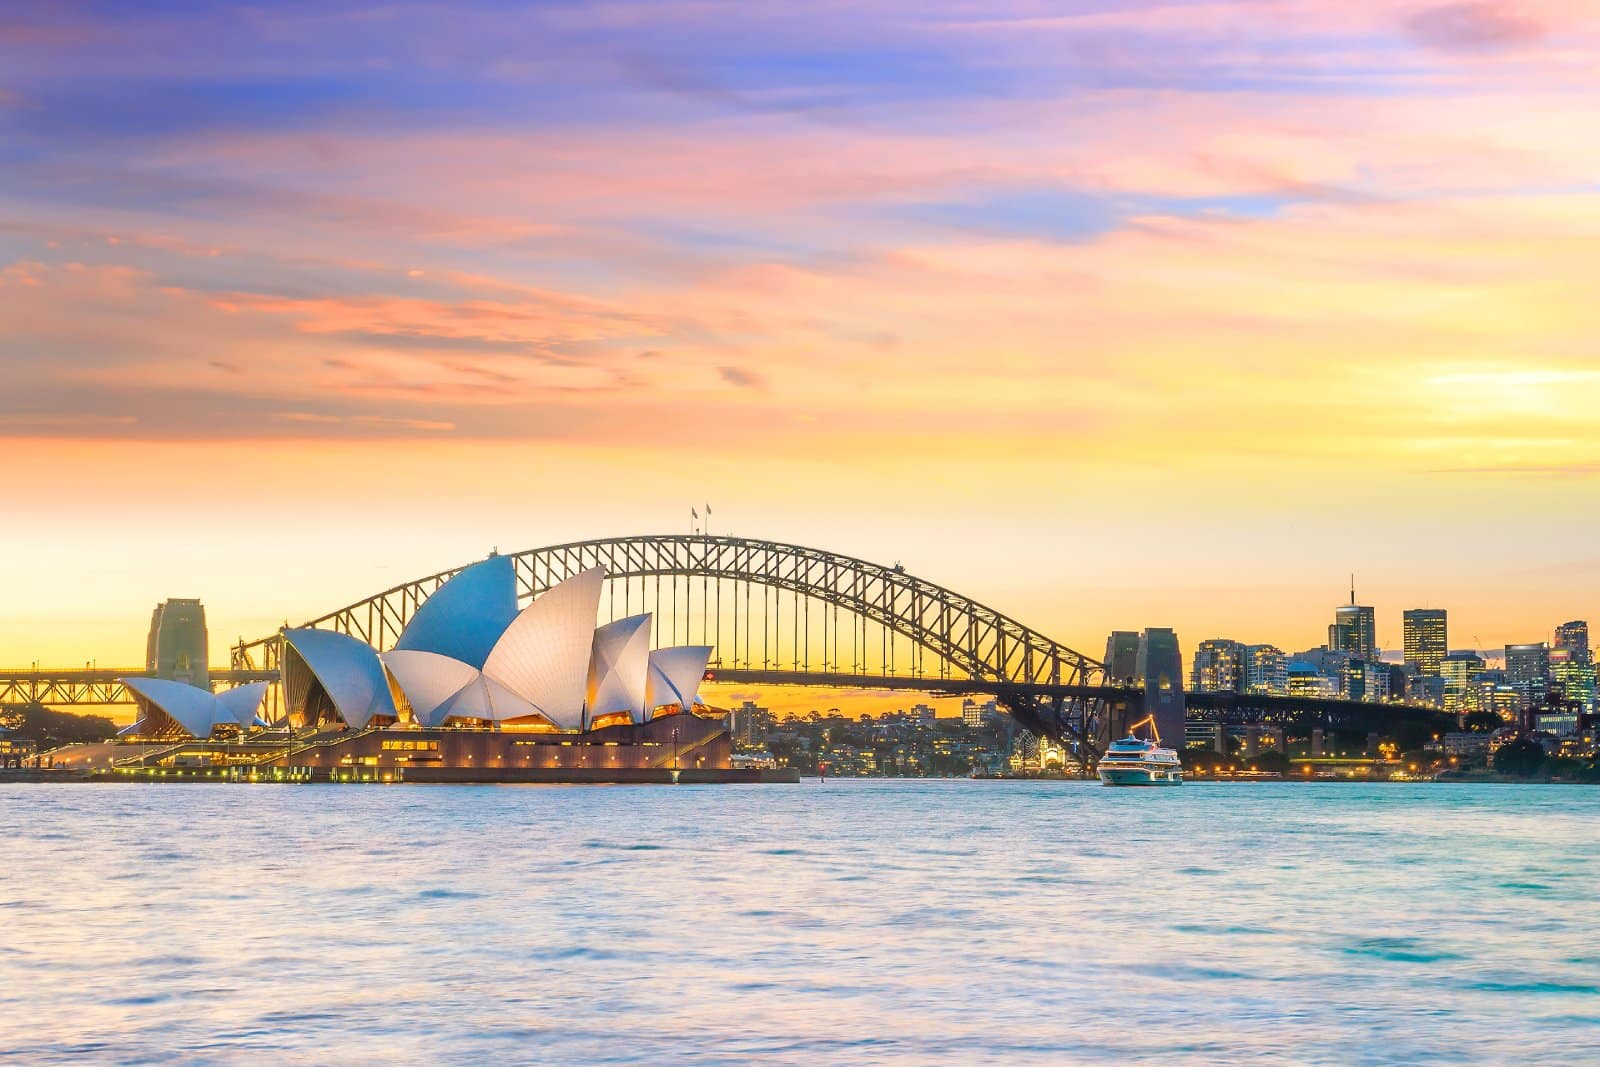 <p class="wp-caption-text">Image Credit: Shutterstock / f11photo</p>  <p><span>Sydney, known for its iconic Opera House and Harbour Bridge, is also a leading destination for students seeking a blend of outdoor adventure, cultural diversity, and academic excellence. The city’s universities offer a wide range of programs focusing on marine biology, environmental sciences, and business. Sydney’s natural harbors, beaches, and national parks provide a unique outdoor classroom for students, while its multicultural neighborhoods offer a global culinary and cultural experience.</span></p>